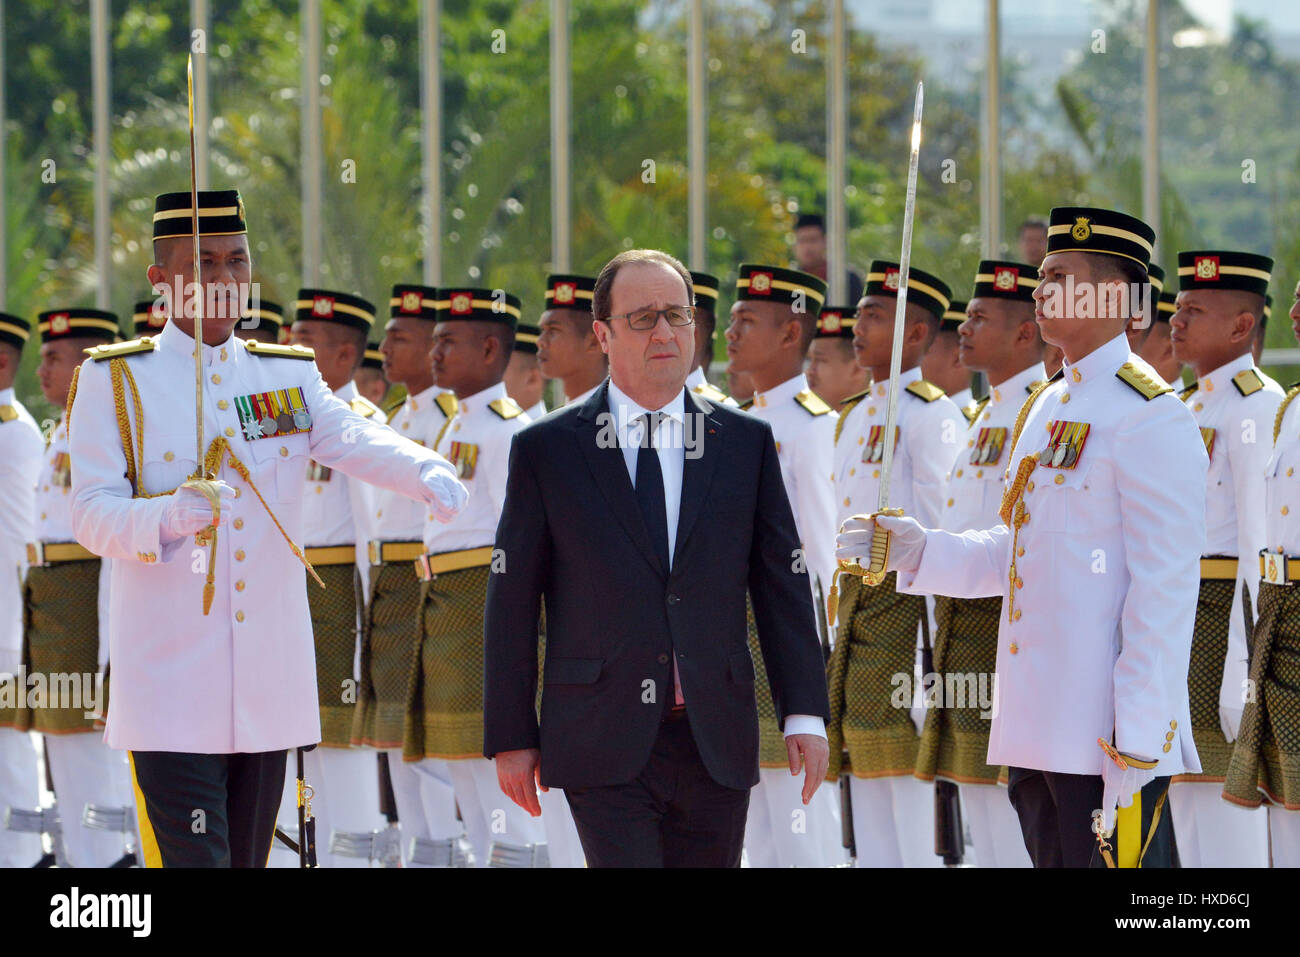 Kuala Lumpur, Malaysia. 28th Mar, 2017. Visiting French President Francois Hollande (C) reviews the guard of honour in Kuala Lumpur, Malaysia, on March 28, 2017. Credit: Chong Voon Chung/Xinhua/Alamy Live News Stock Photo